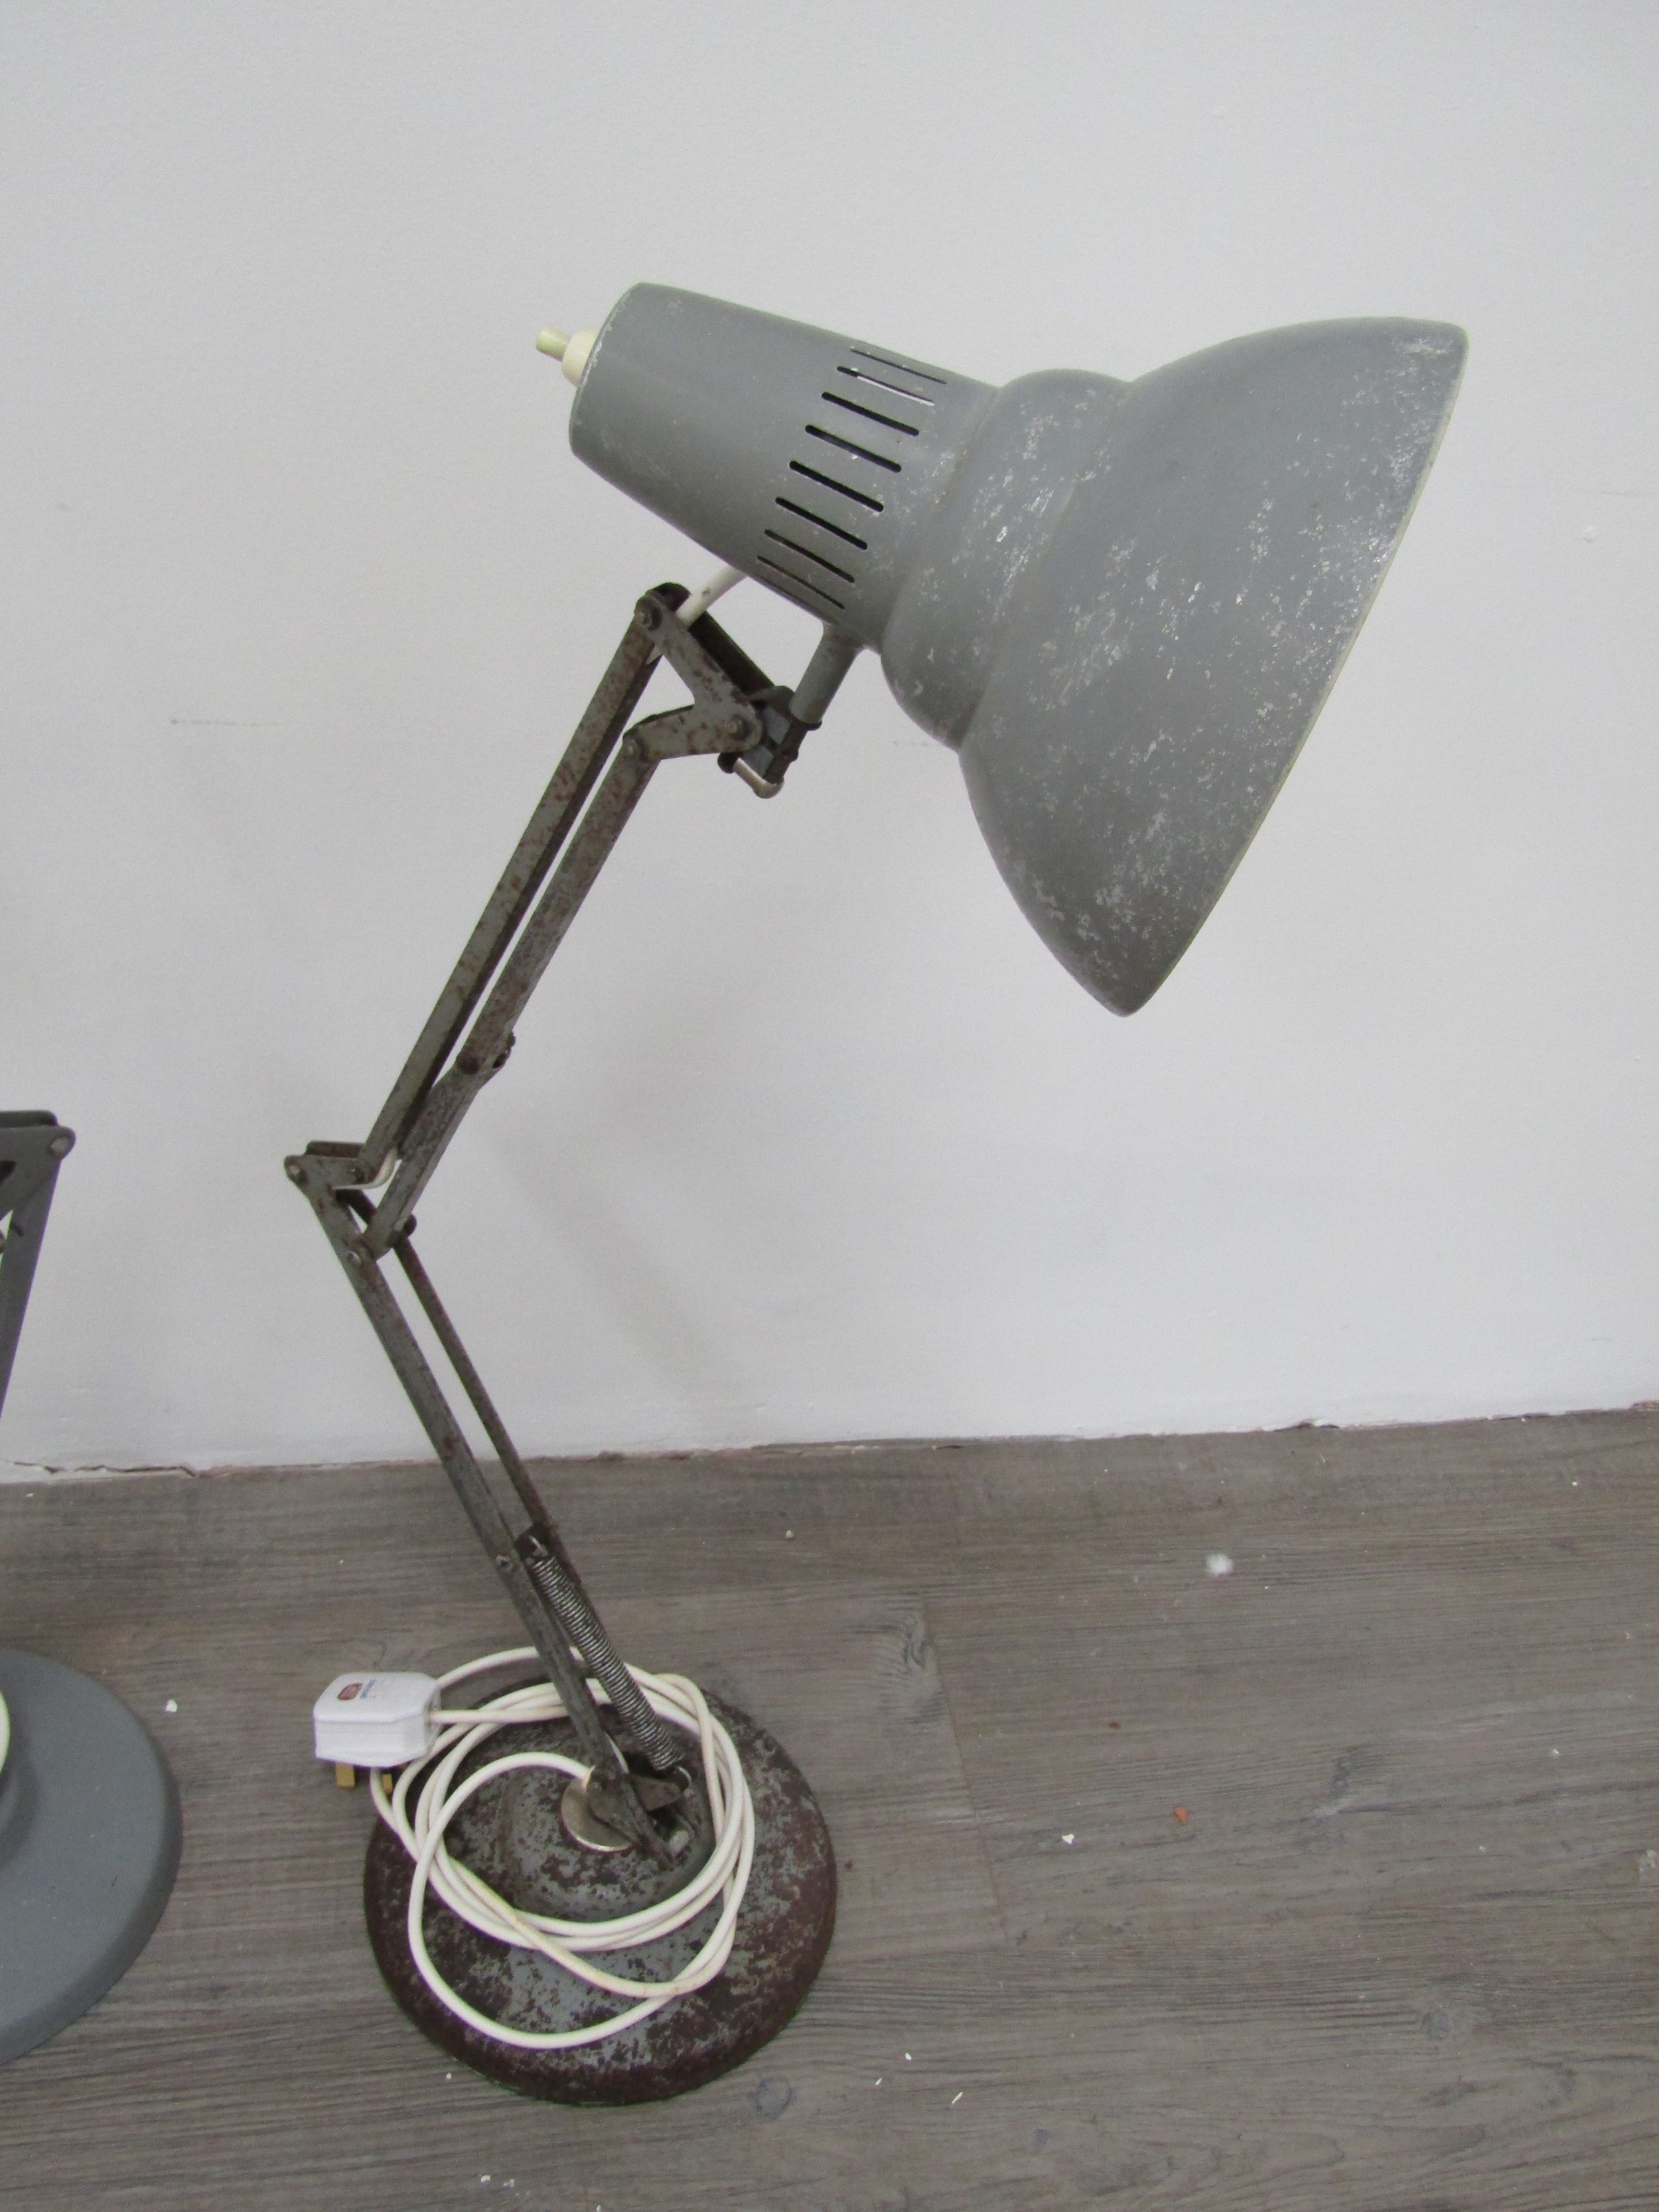 Four '1001' model angle poise lamps in grey colourway - Image 2 of 3